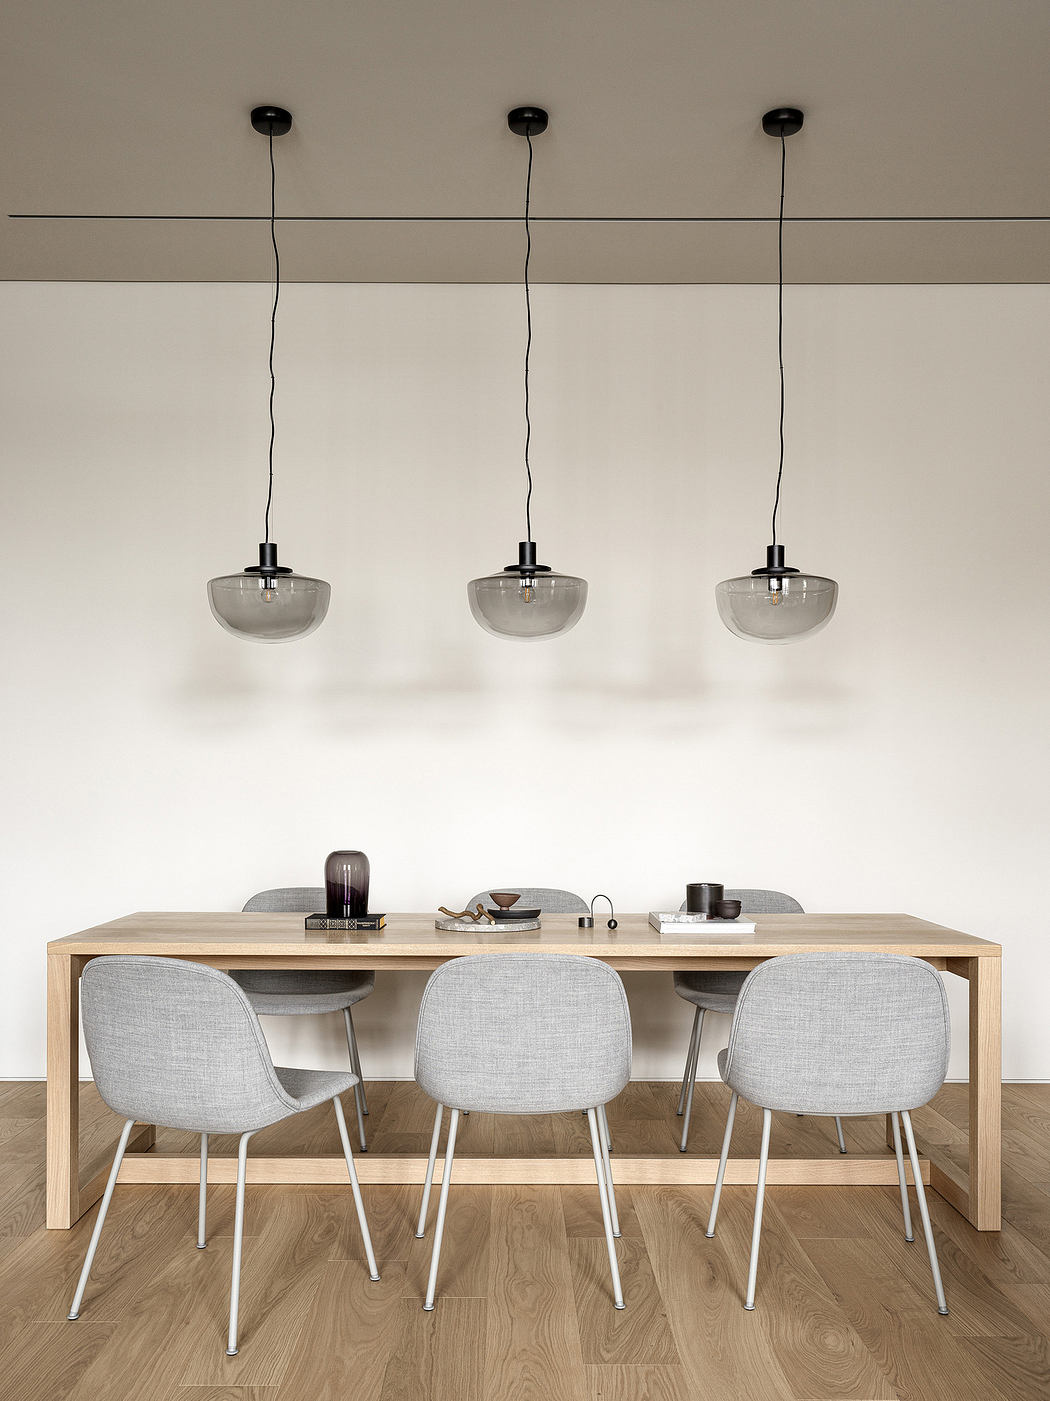 Modern dining area with a wooden table, four chairs, and three pendant lights.